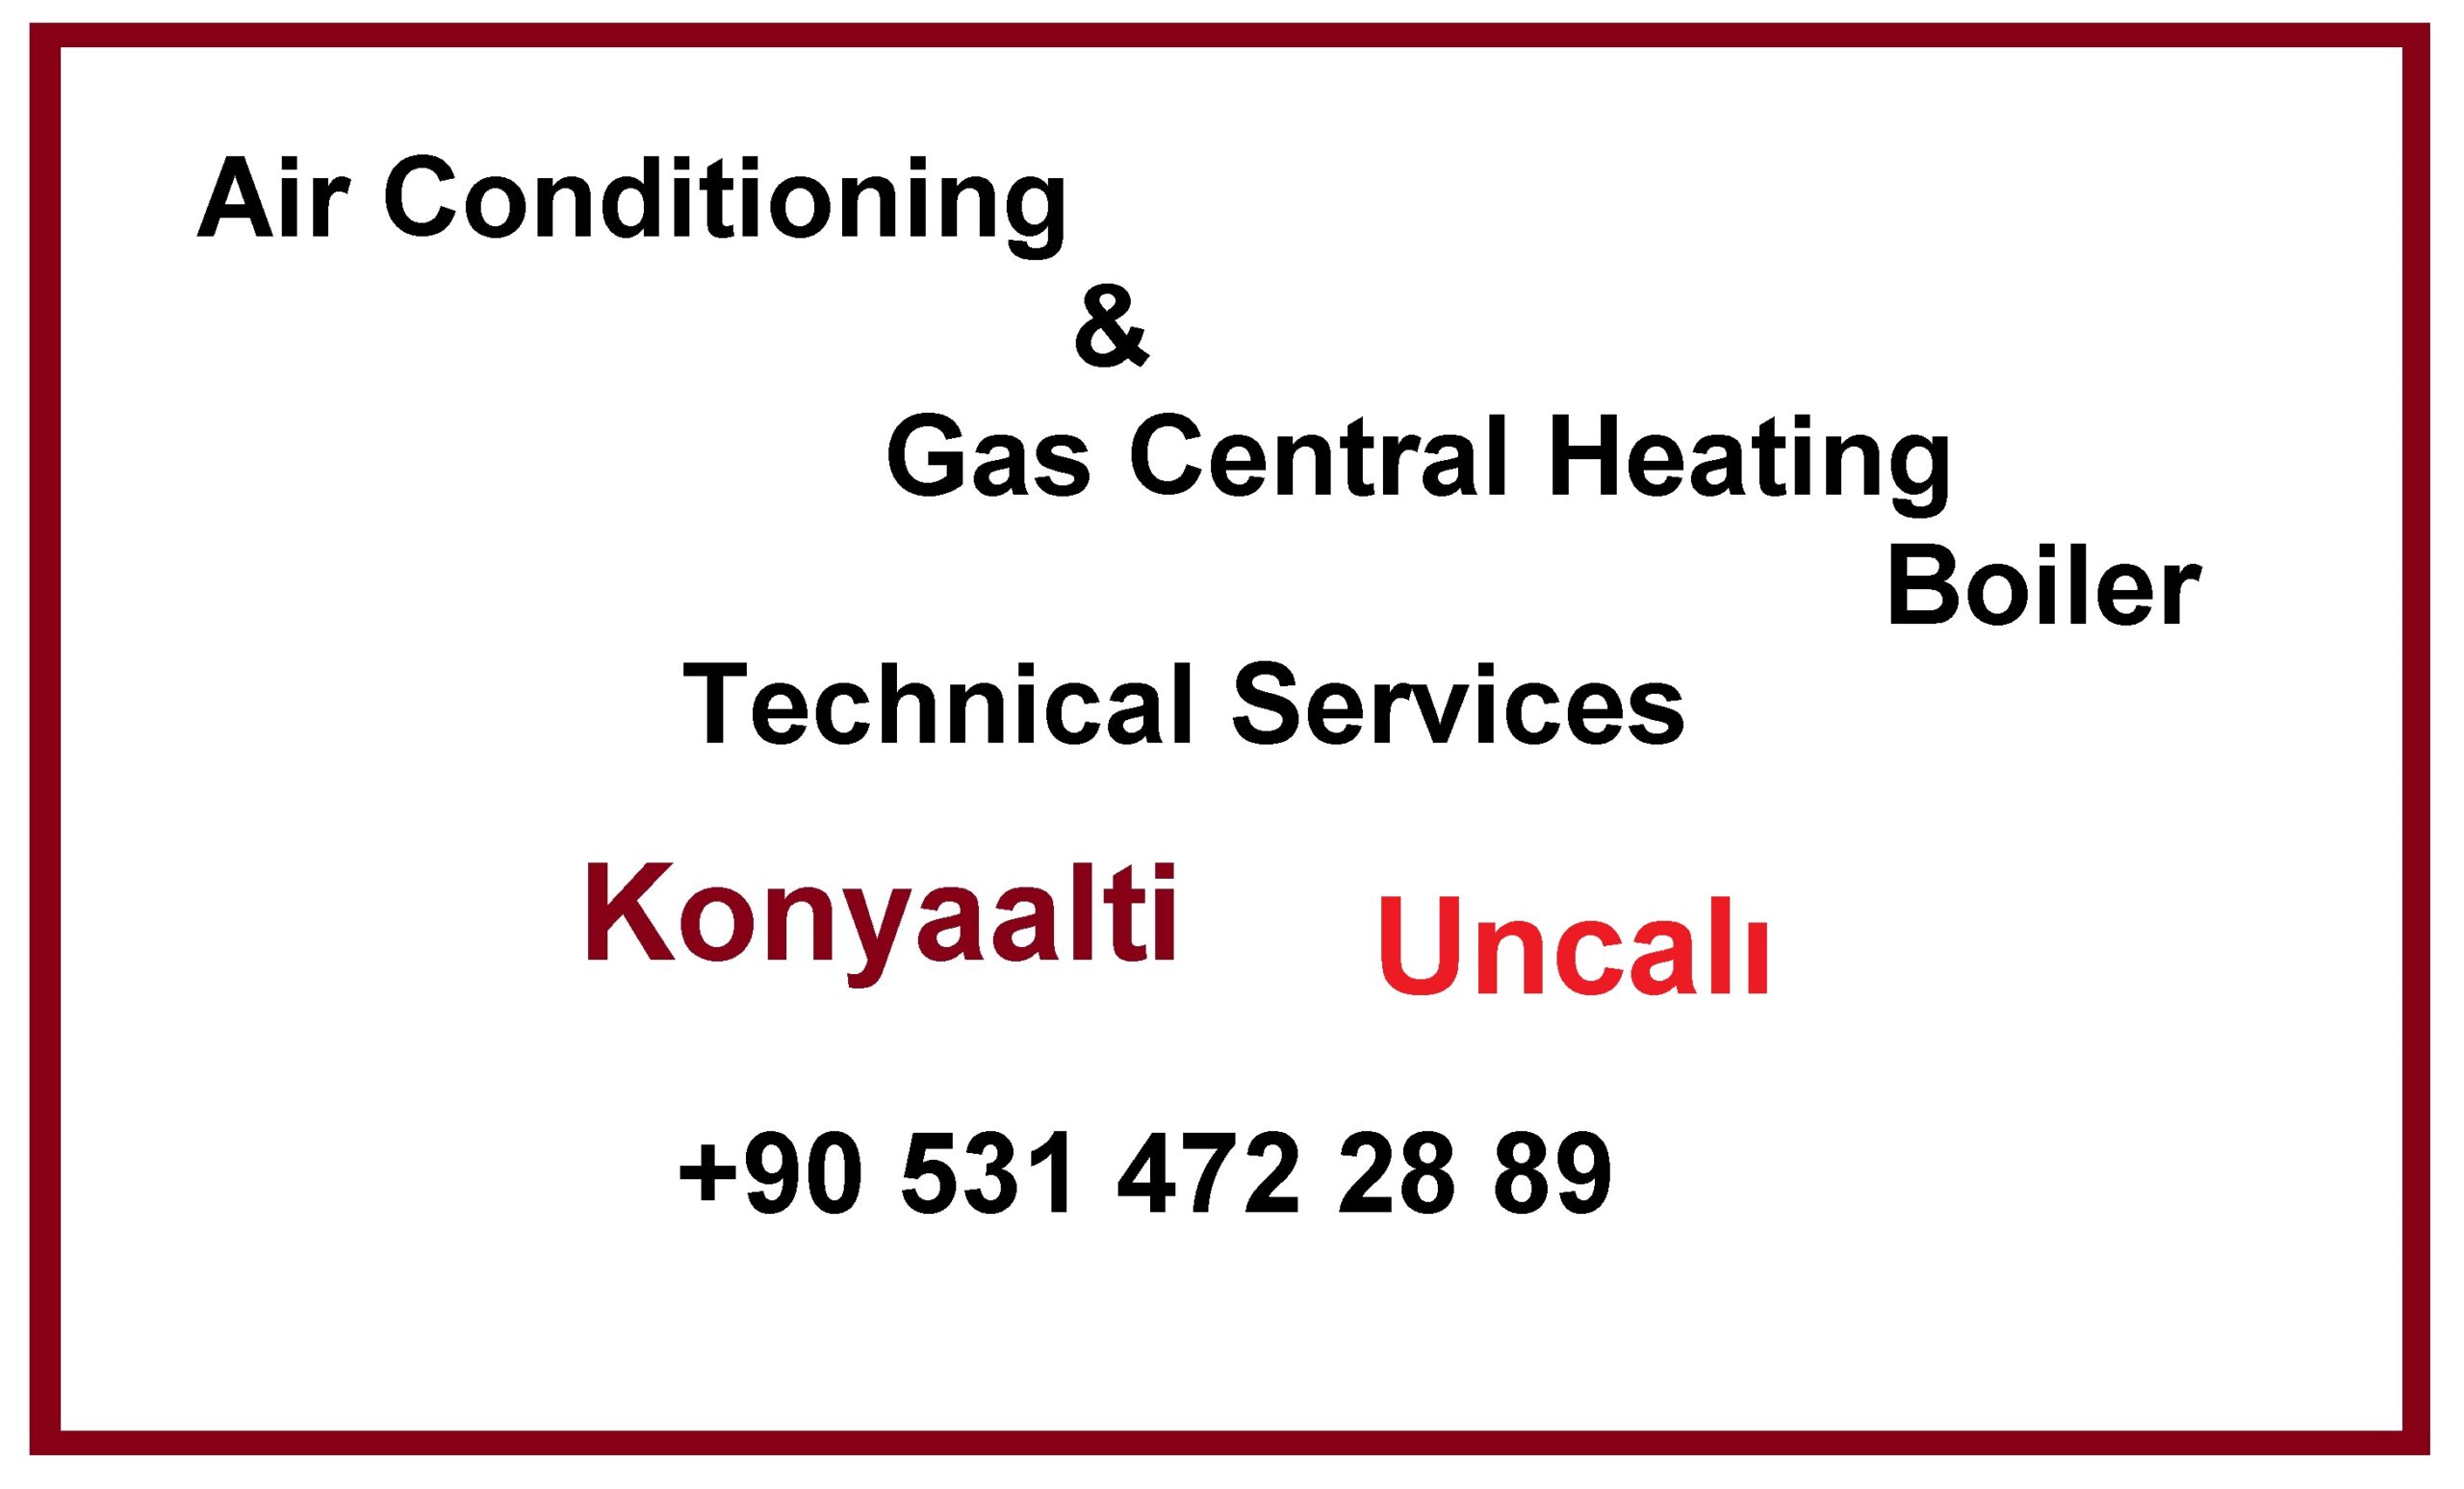 Air Conditioning, Gas Central Heating TS in Uncalı